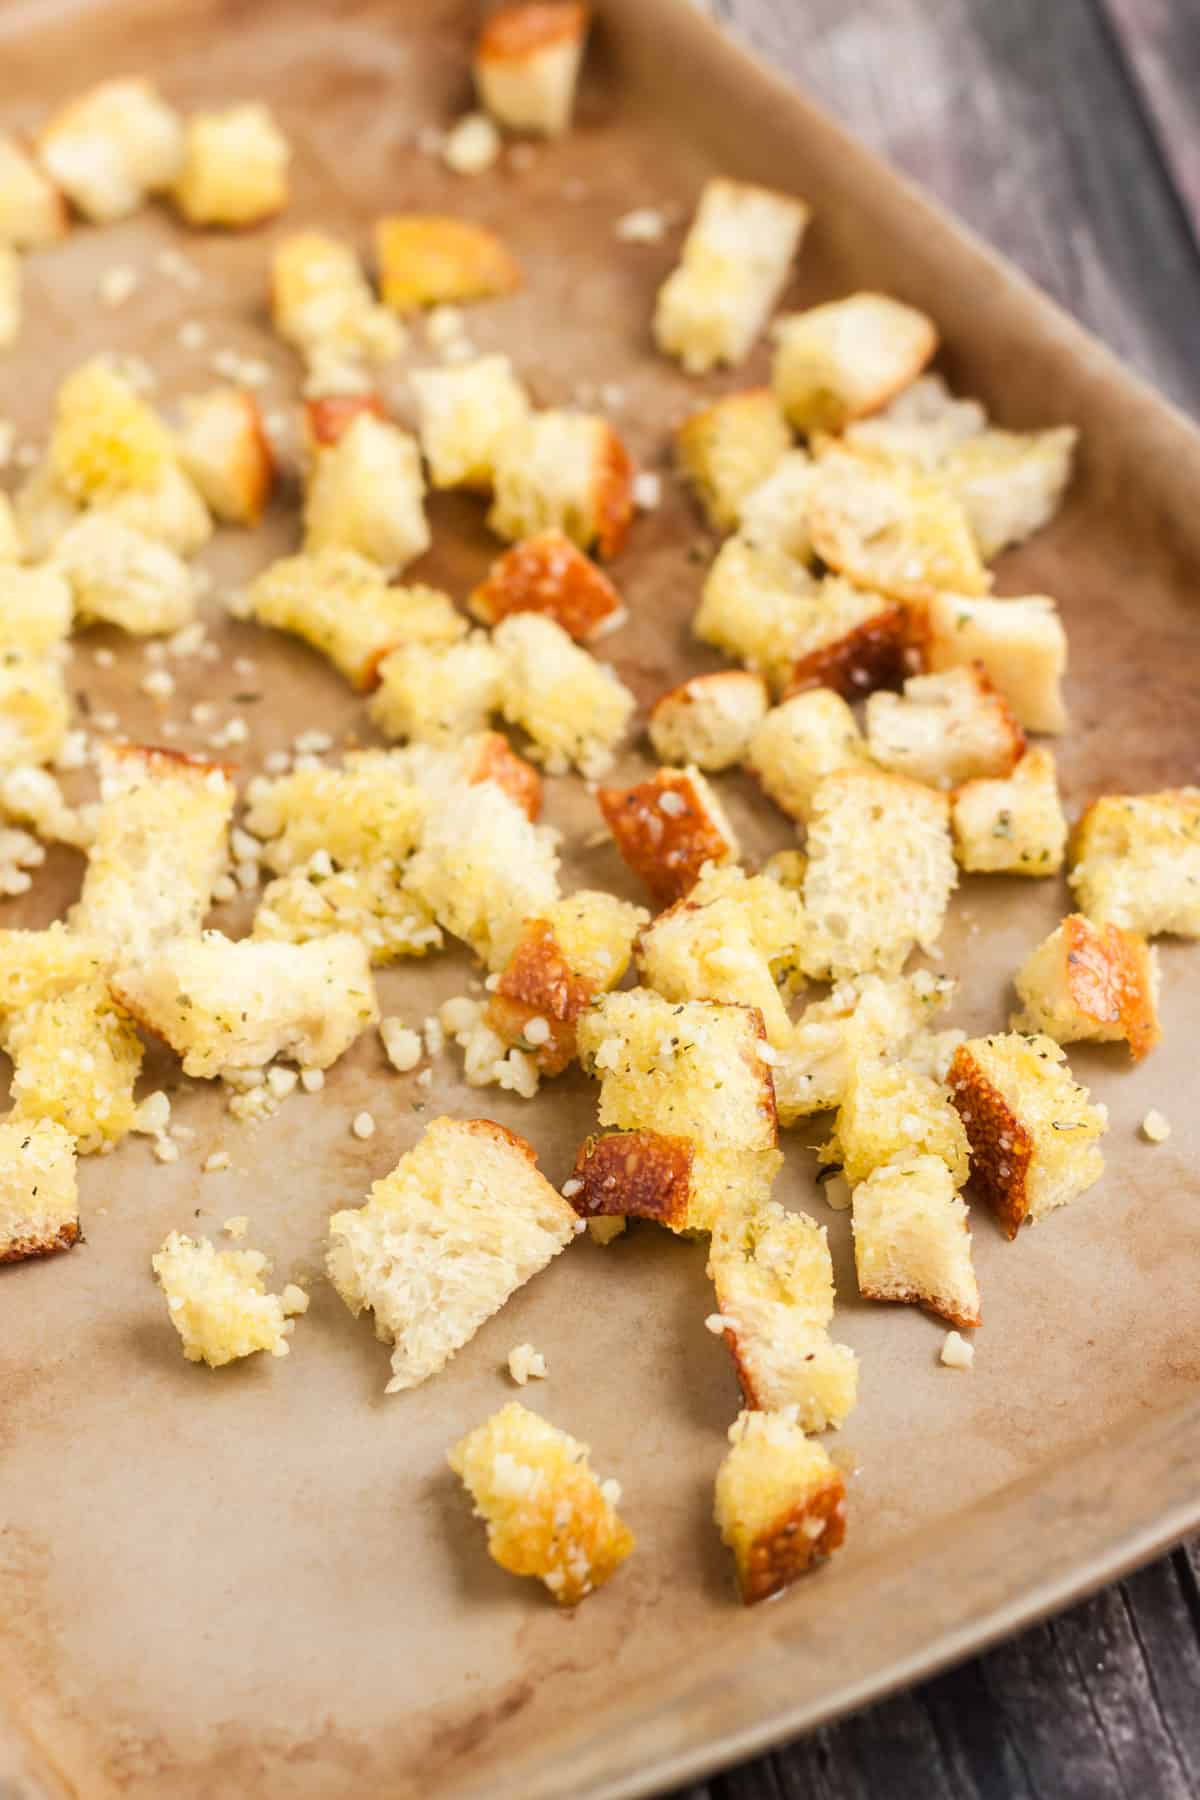 stone baking sheet with cubes of bread croutons sprinkled with parmesan cheese and herbs